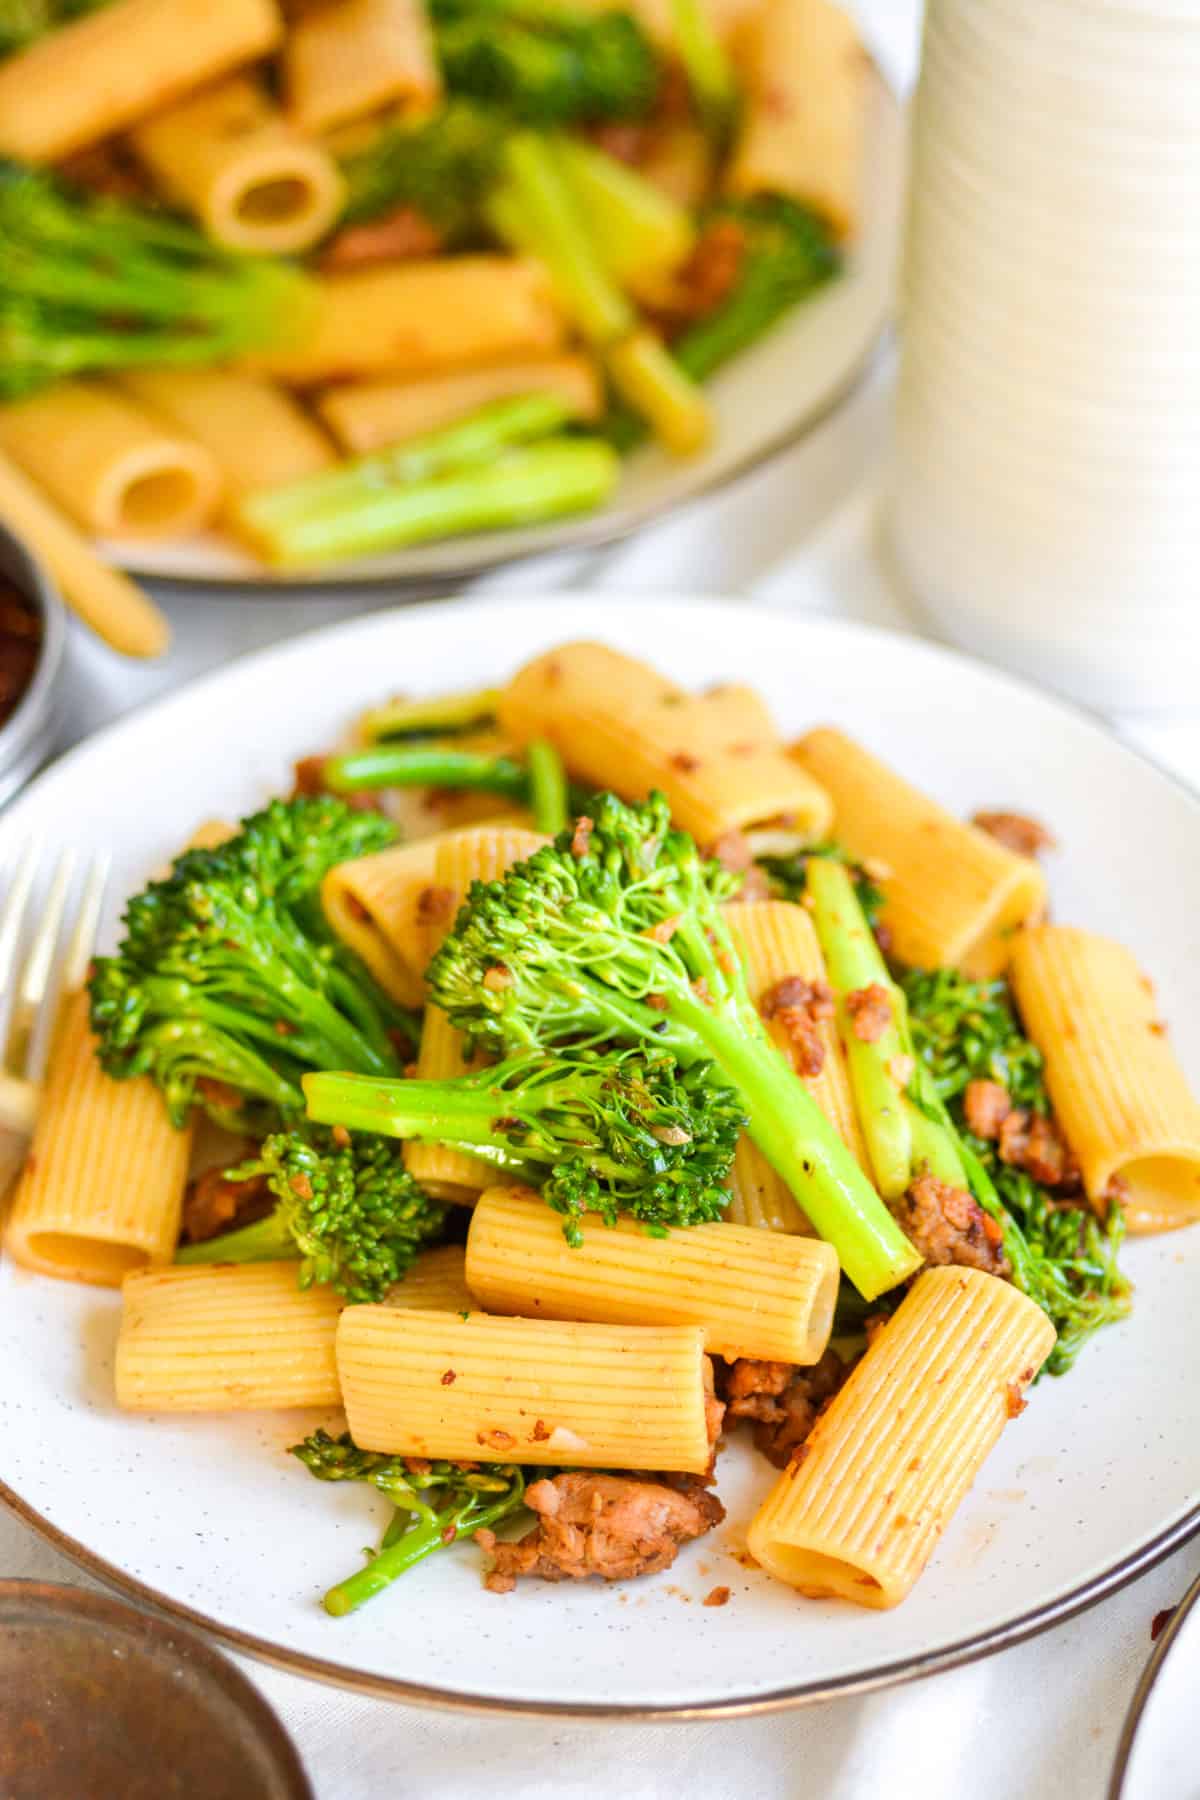 Vegan Sausage Pasta with broccolini on a beige plate with a gold fork.